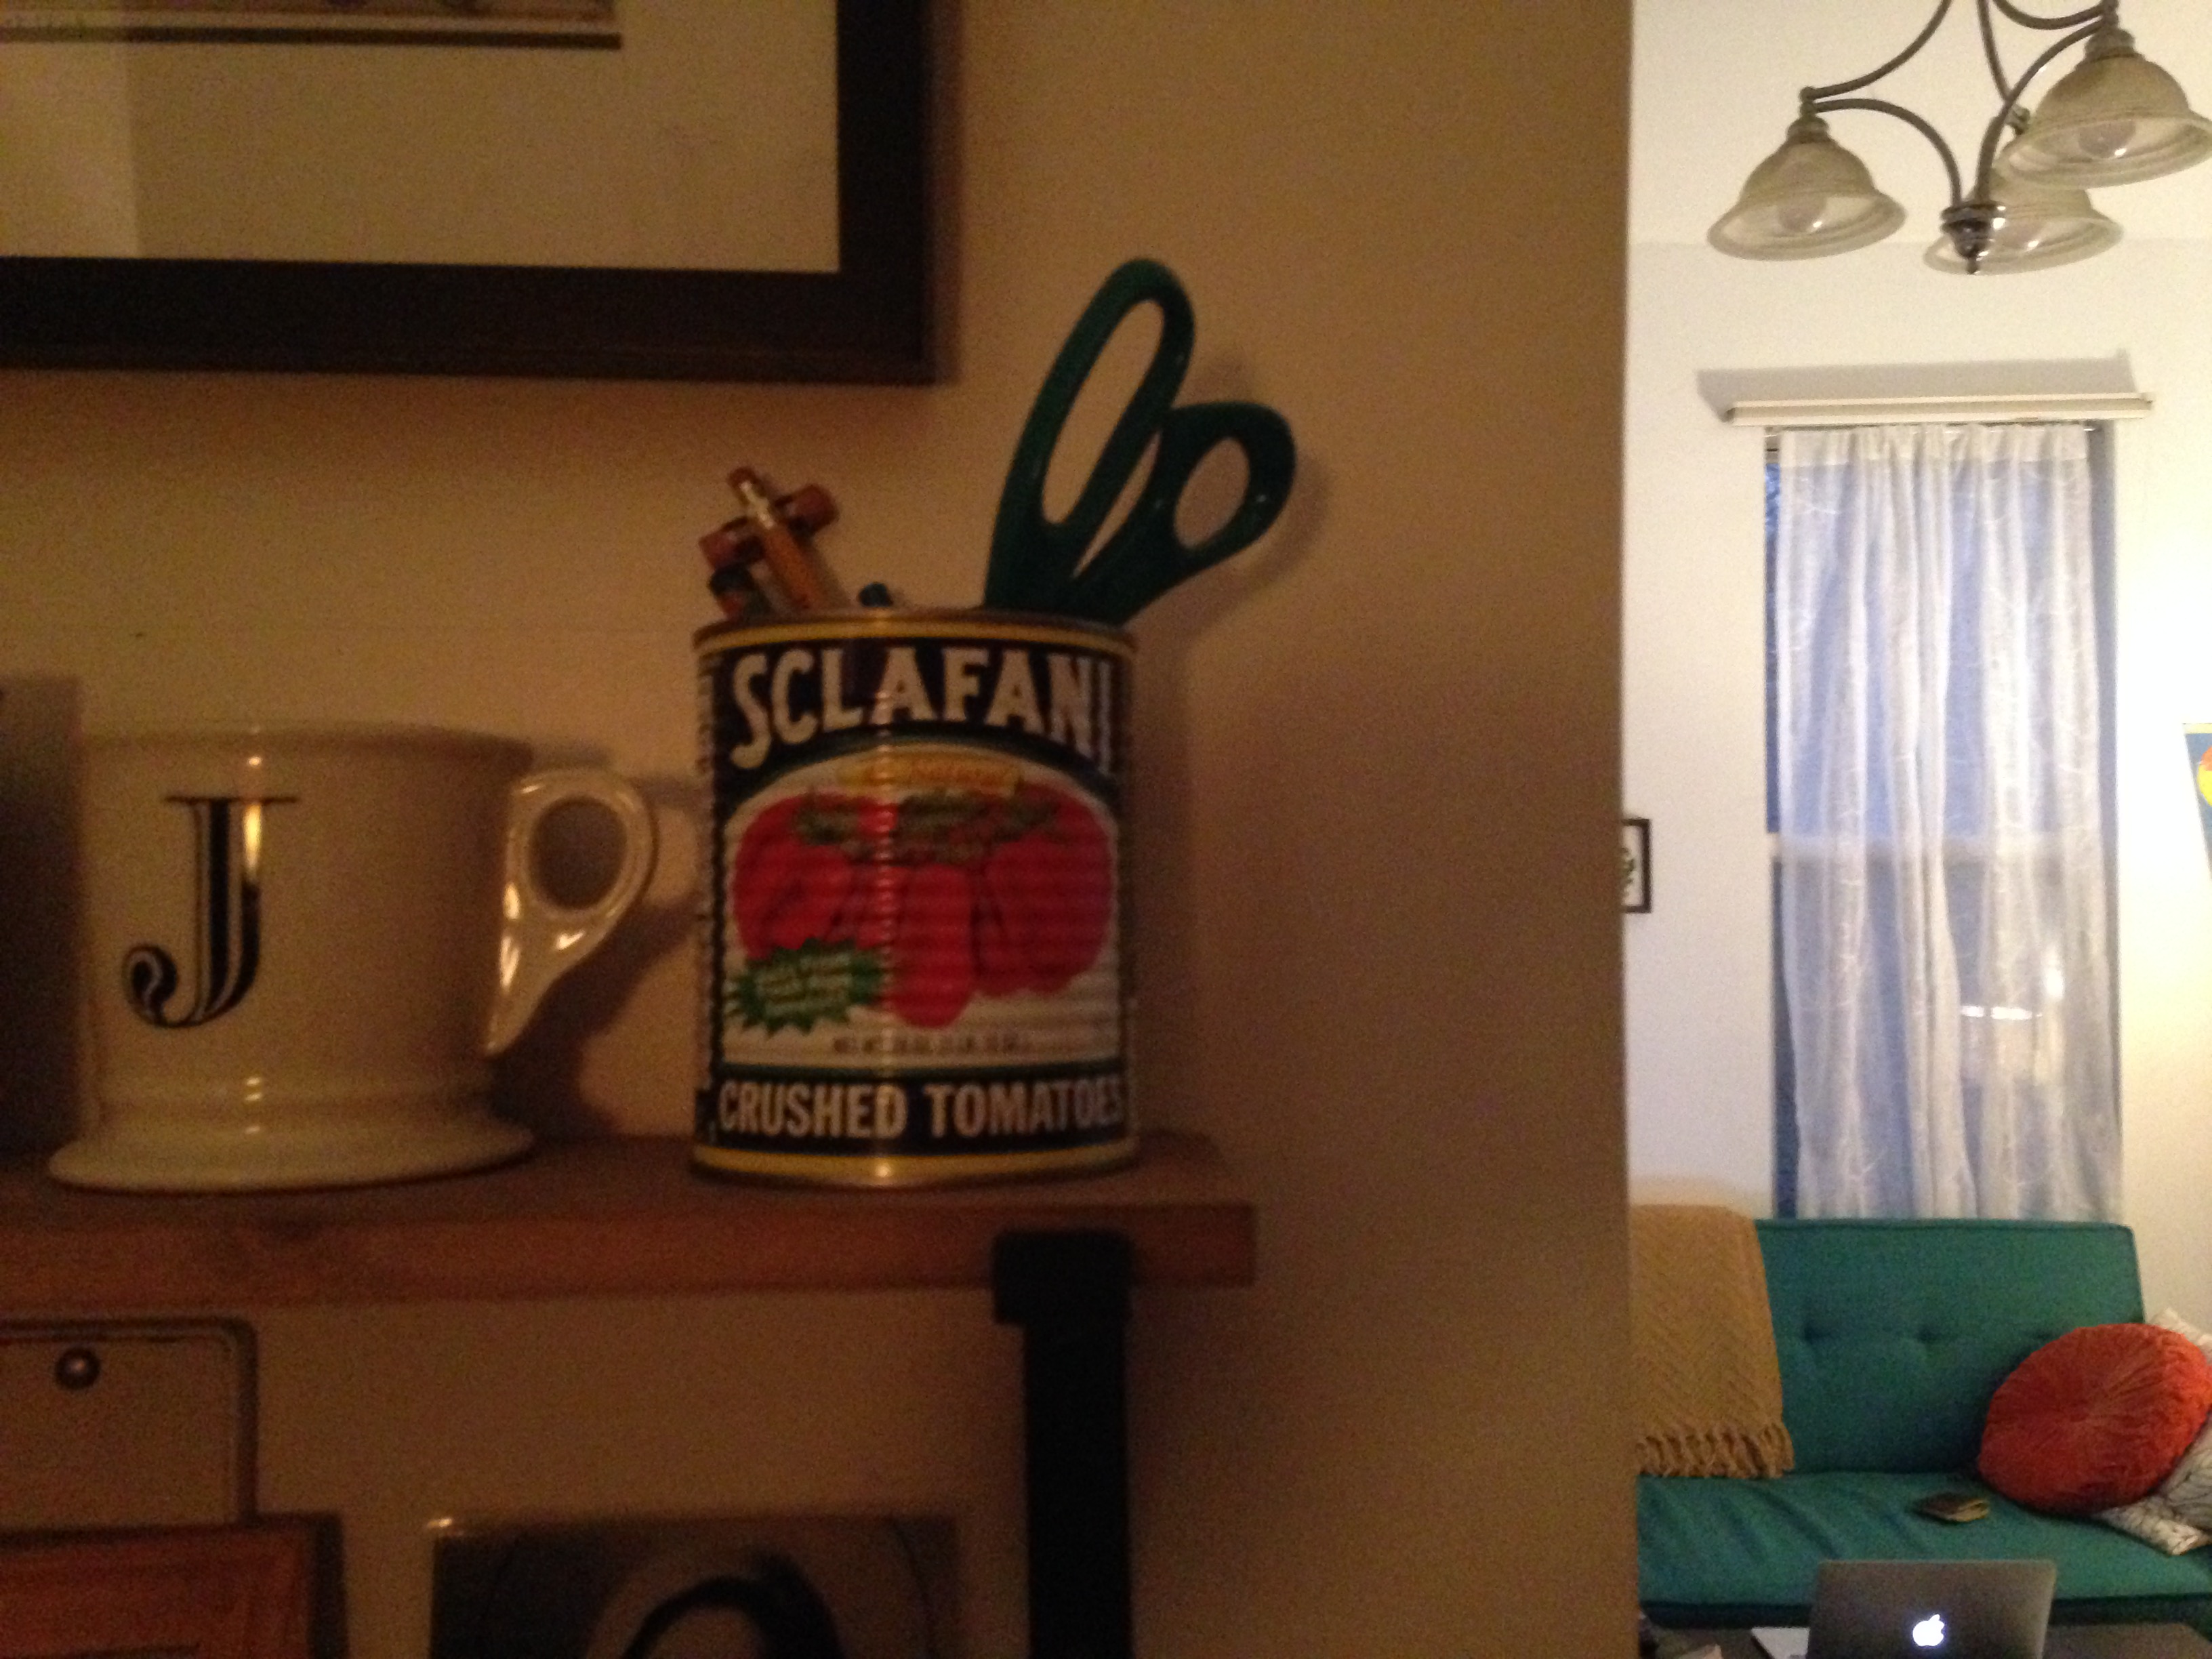 A vintage Sclafani tin can used for scissor and pencil storage in an apartment.